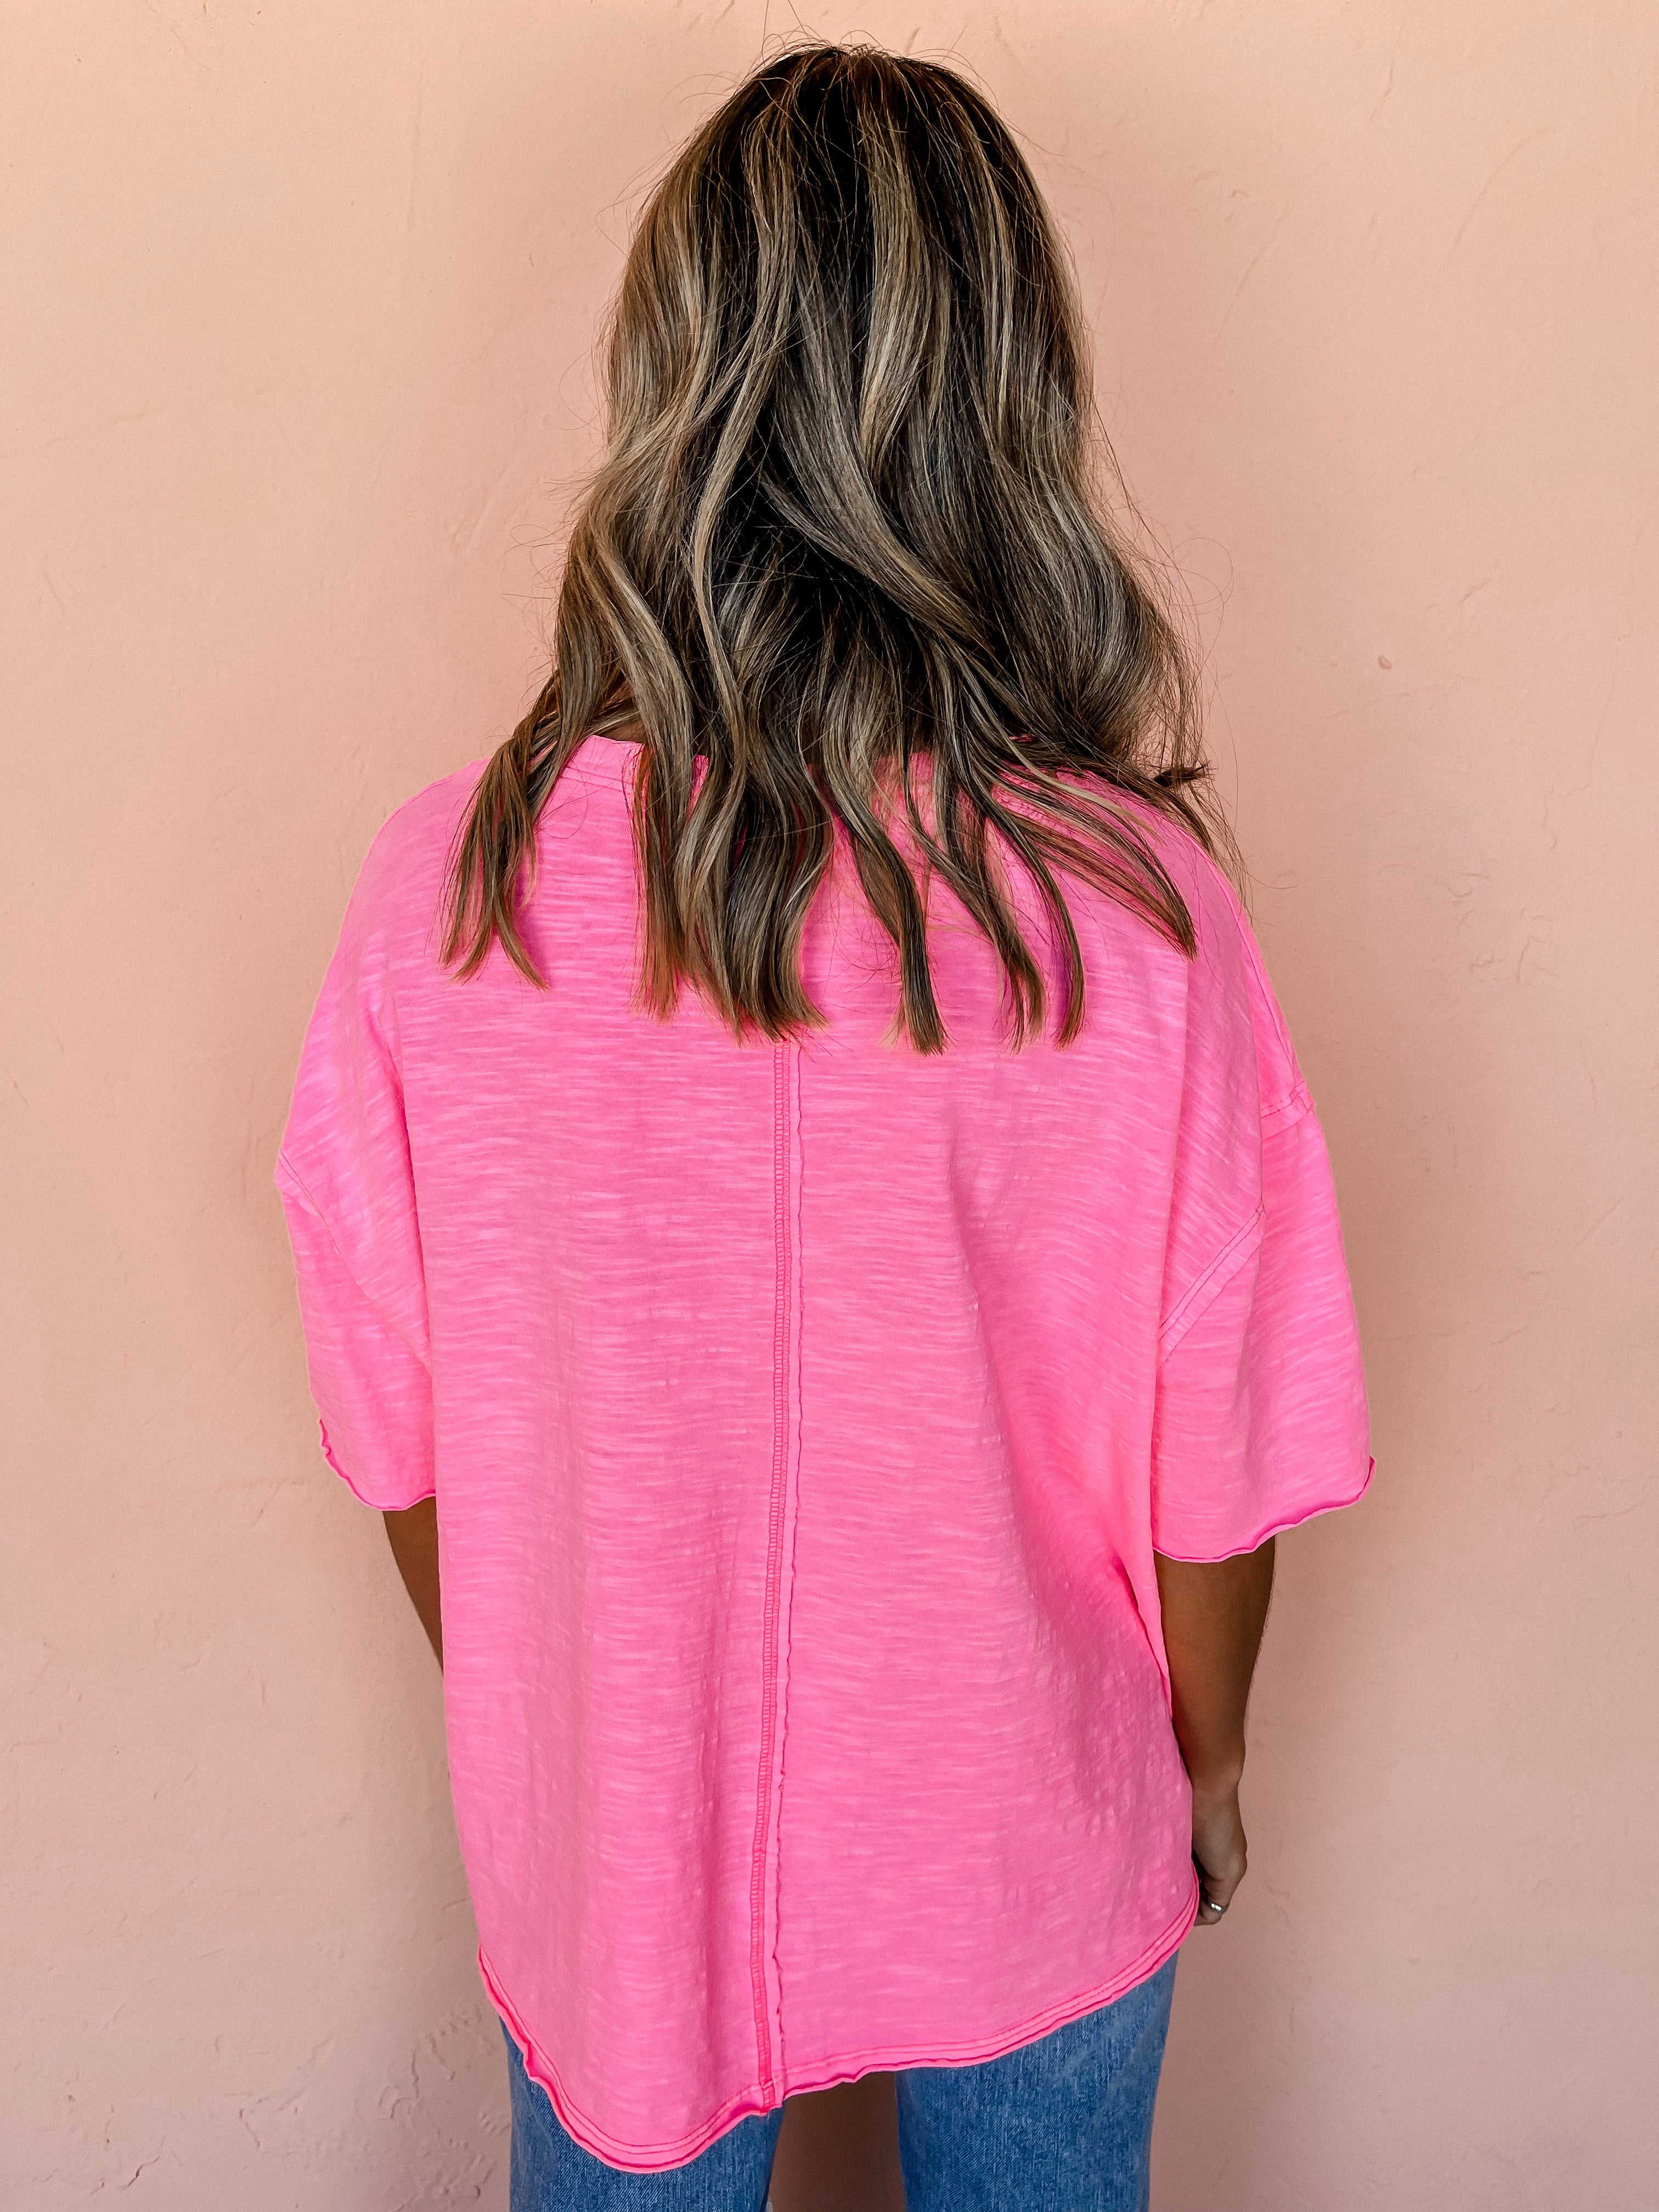 The Fun Side Short Sleeve Top-Hot Pink